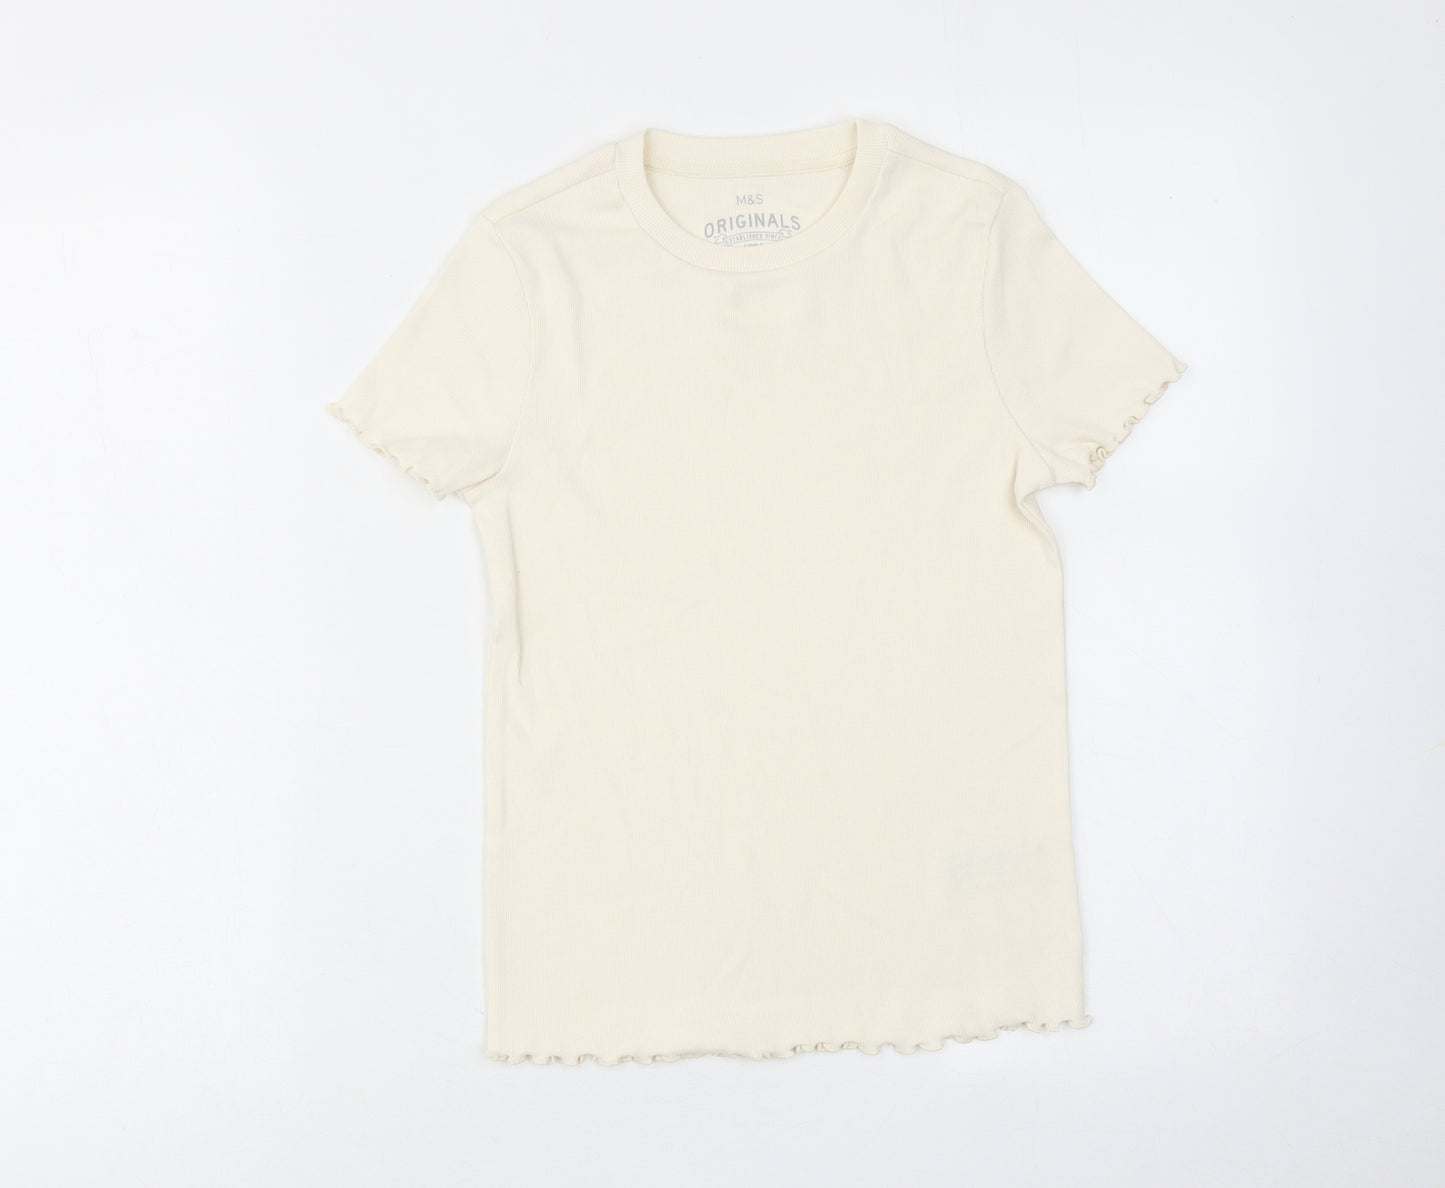 Marks and Spencer Girls Ivory Cotton Basic T-Shirt Size 10-11 Years Round Neck Pullover